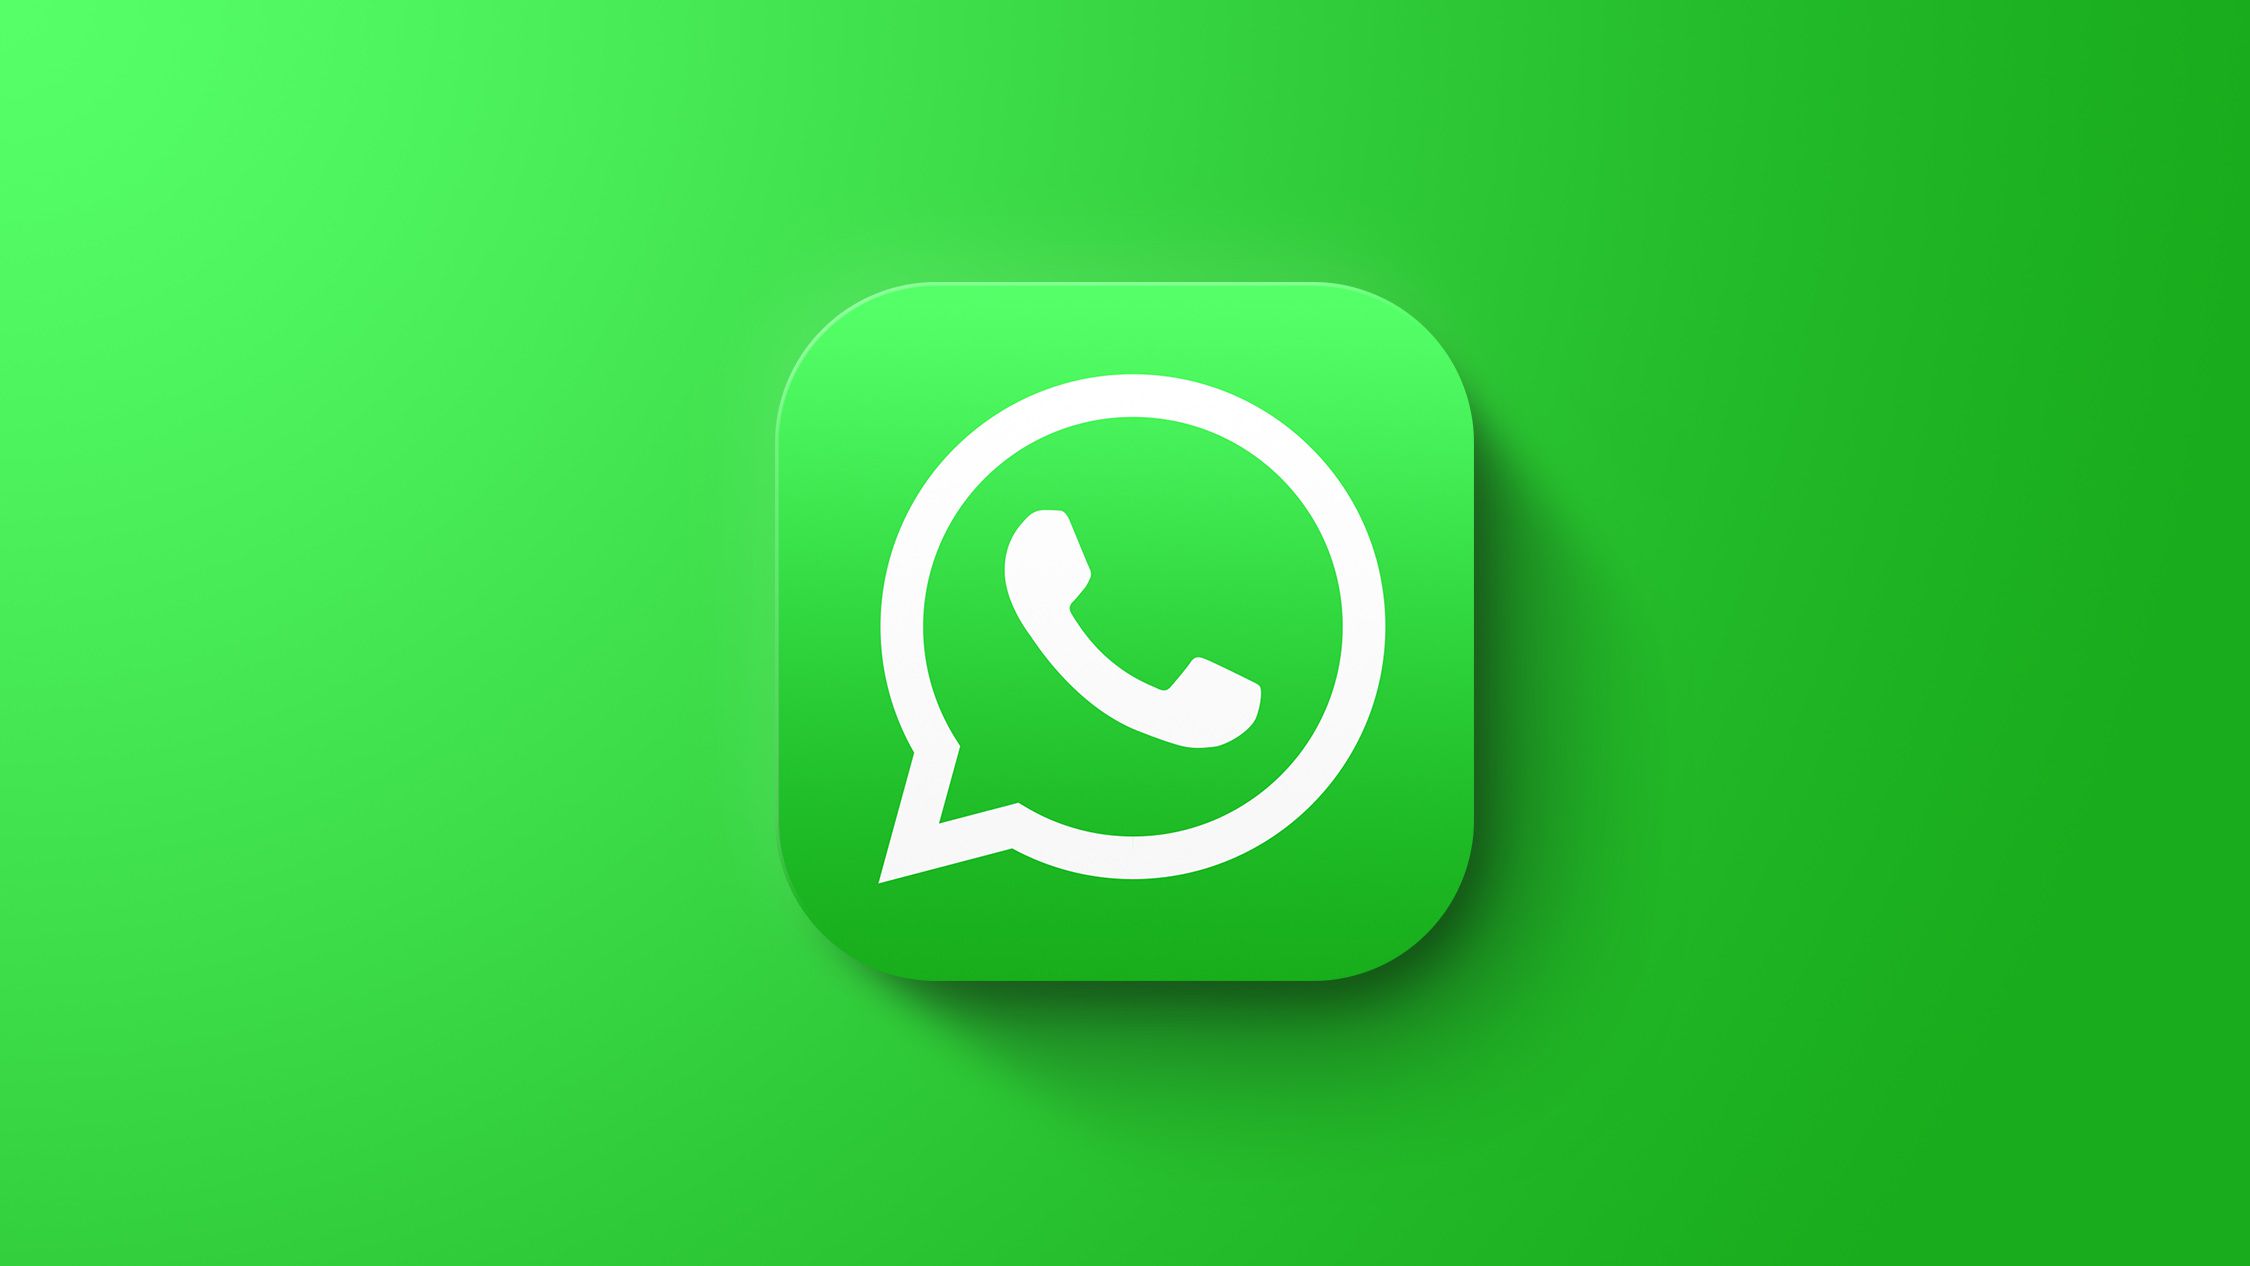 A green and white WhatsApp icon on a green background with a shadow, representing the search query 'WhatsApp photos not appearing in gallery'.